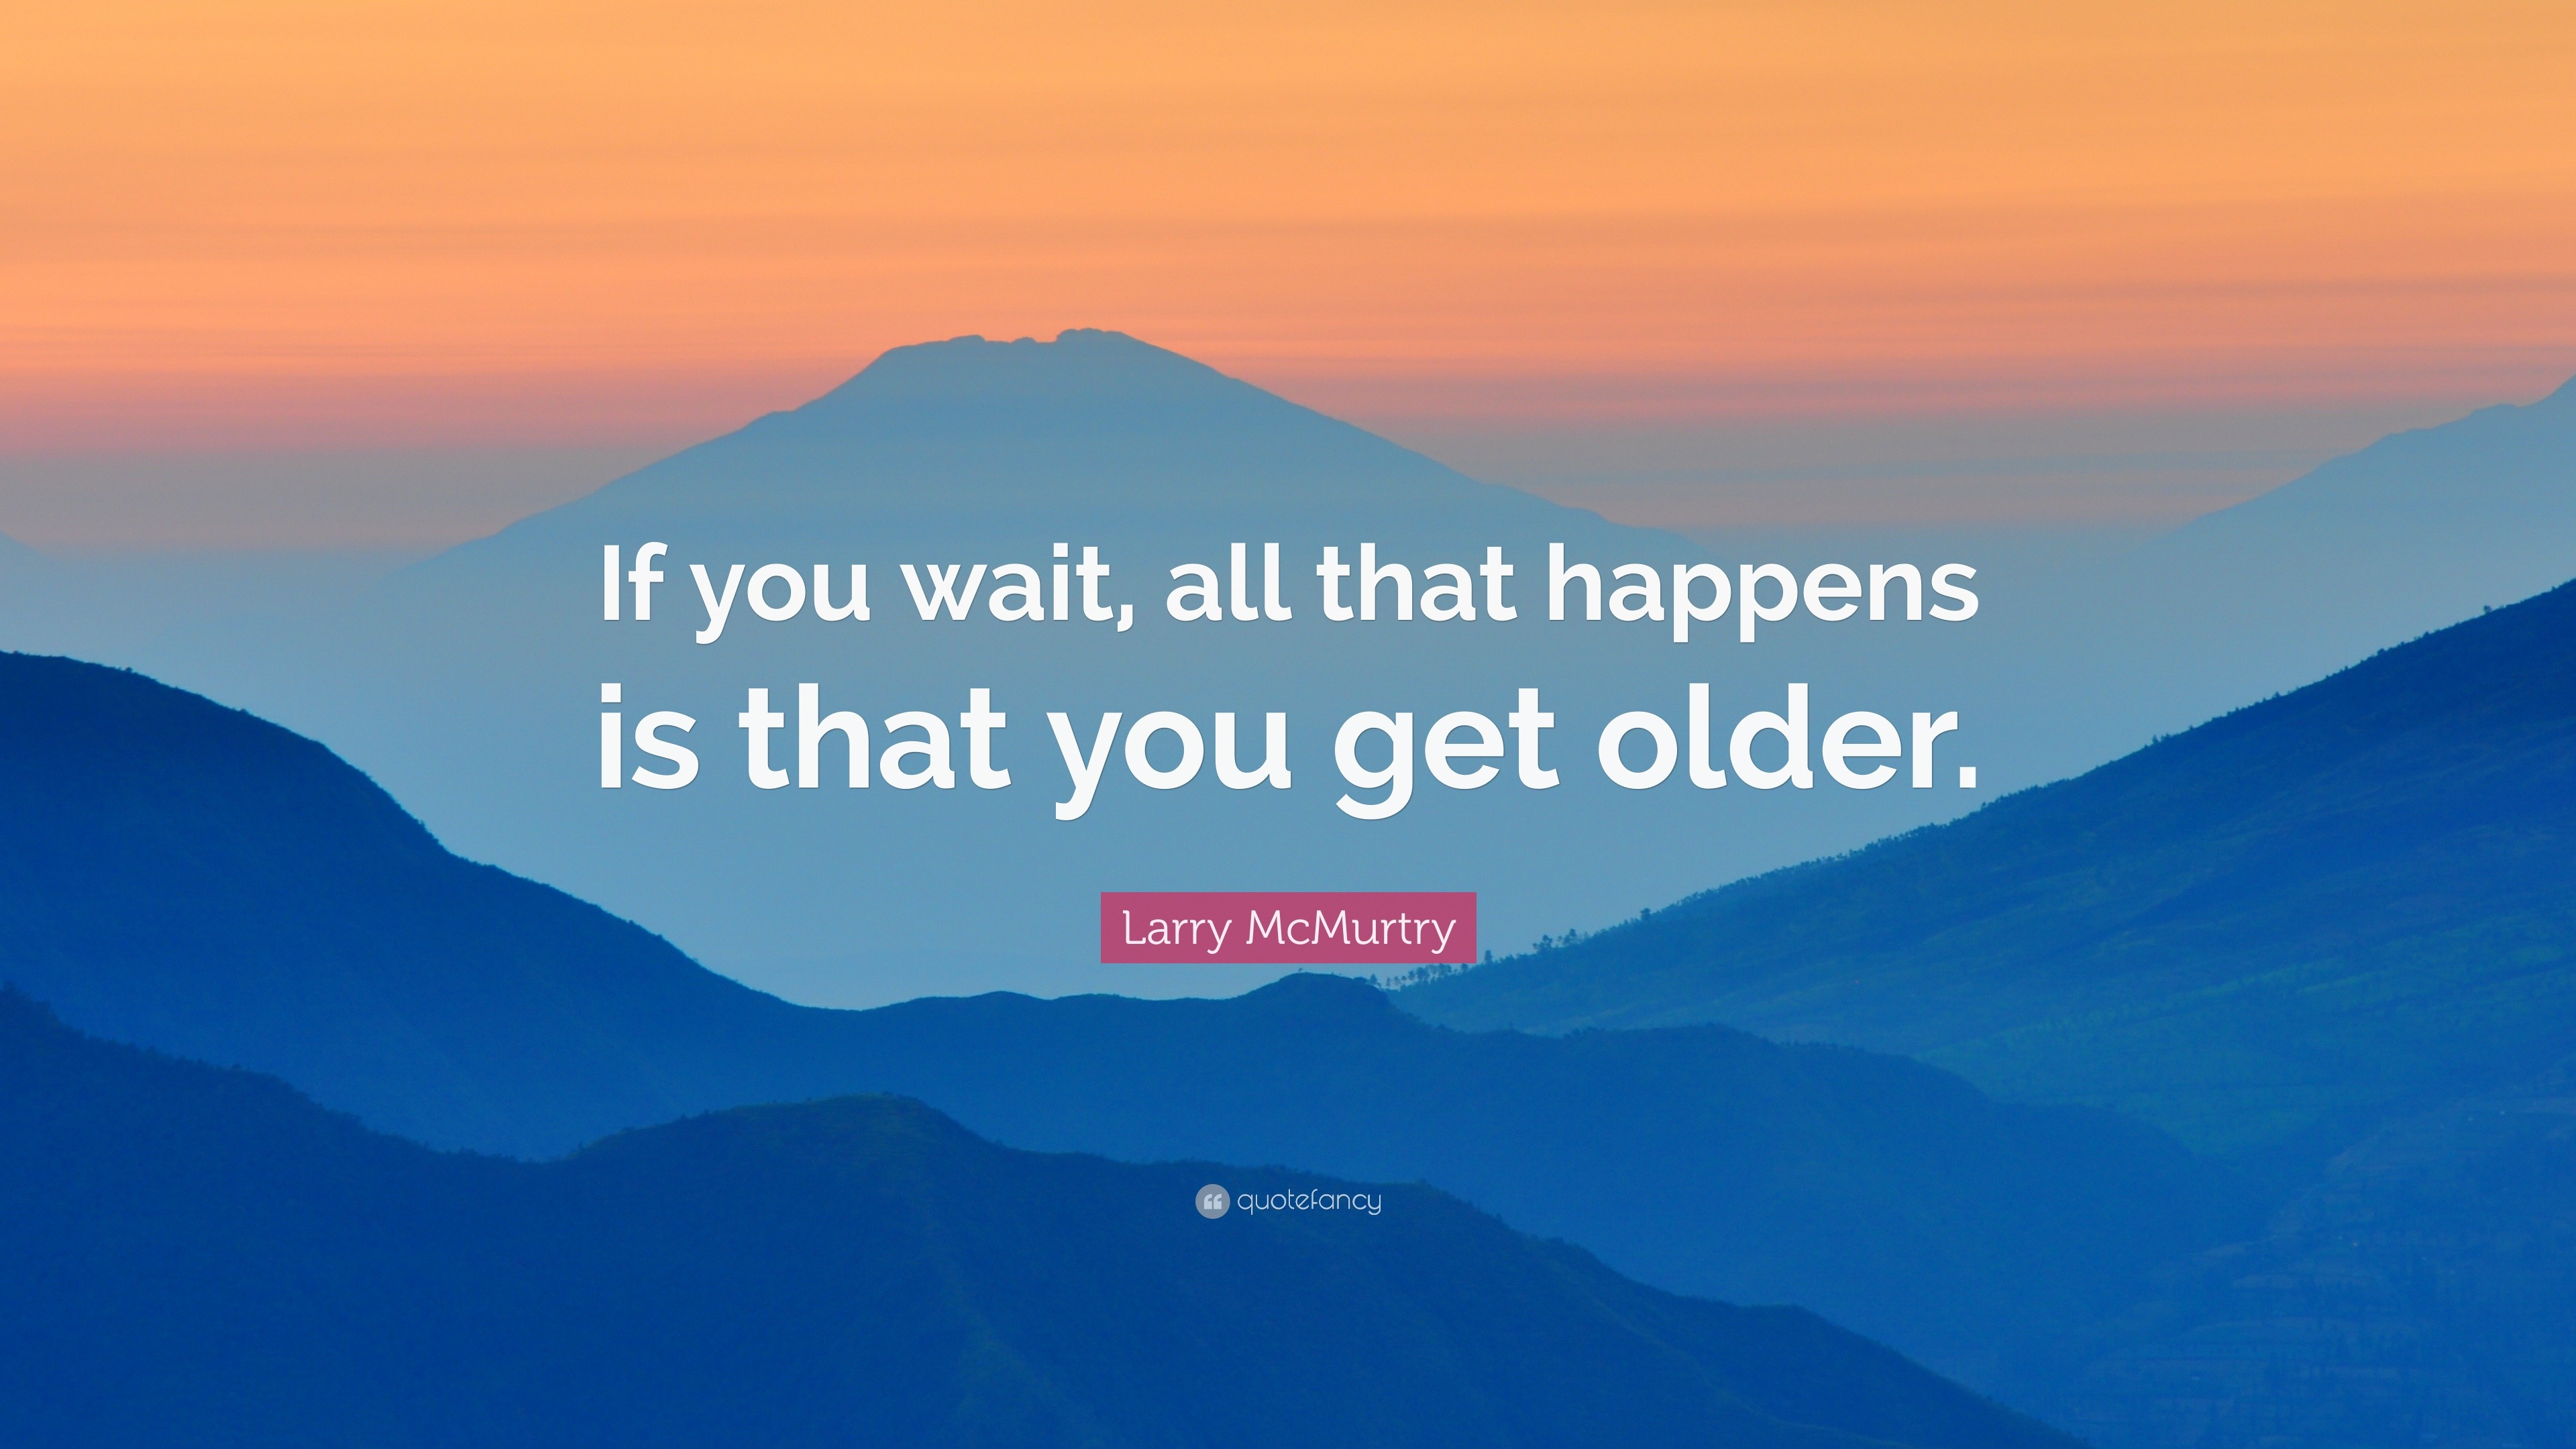 Larry McMurtry Quote: "If you wait, all that happens is that you get older." (7 wallpapers ...